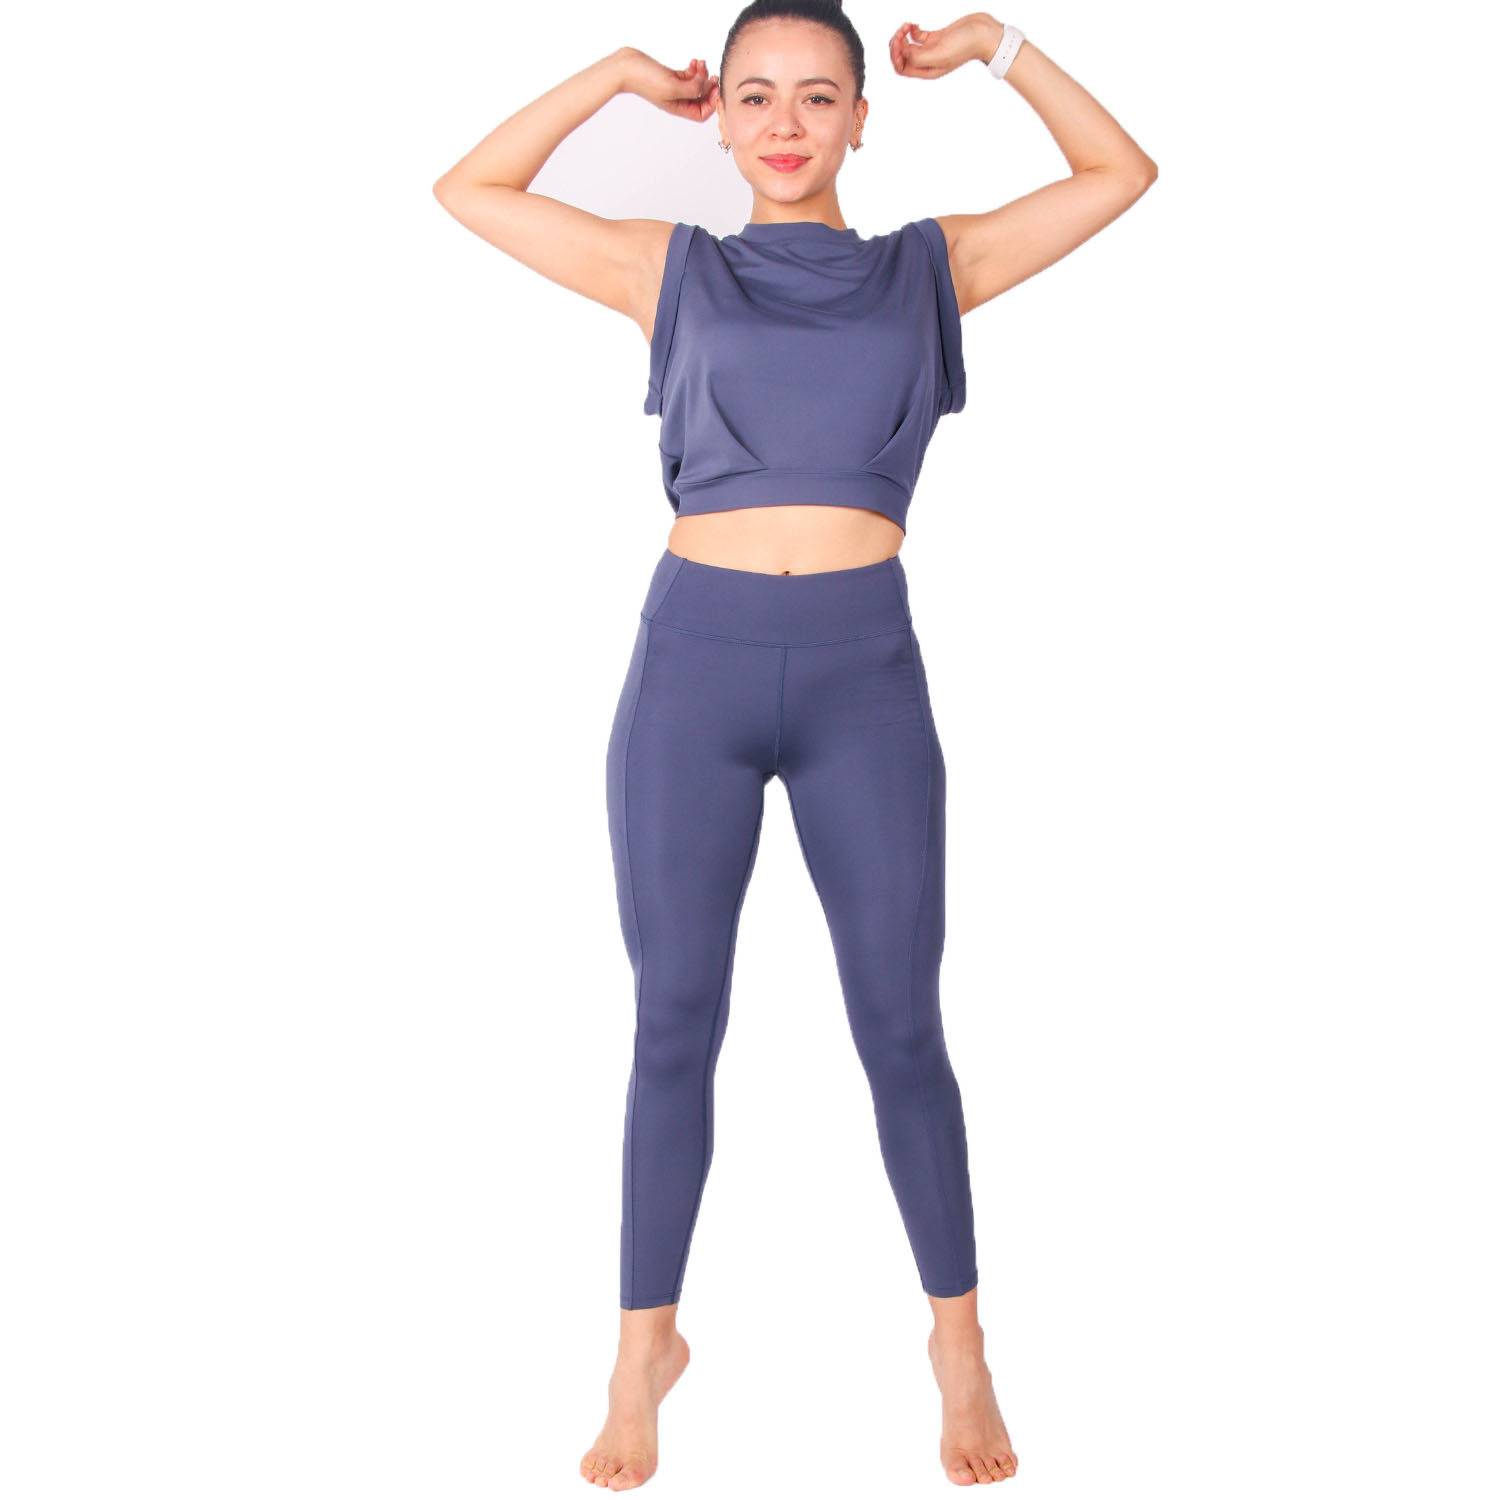 Do you prefer yoga T shirt with leggings more suitable for yoga?